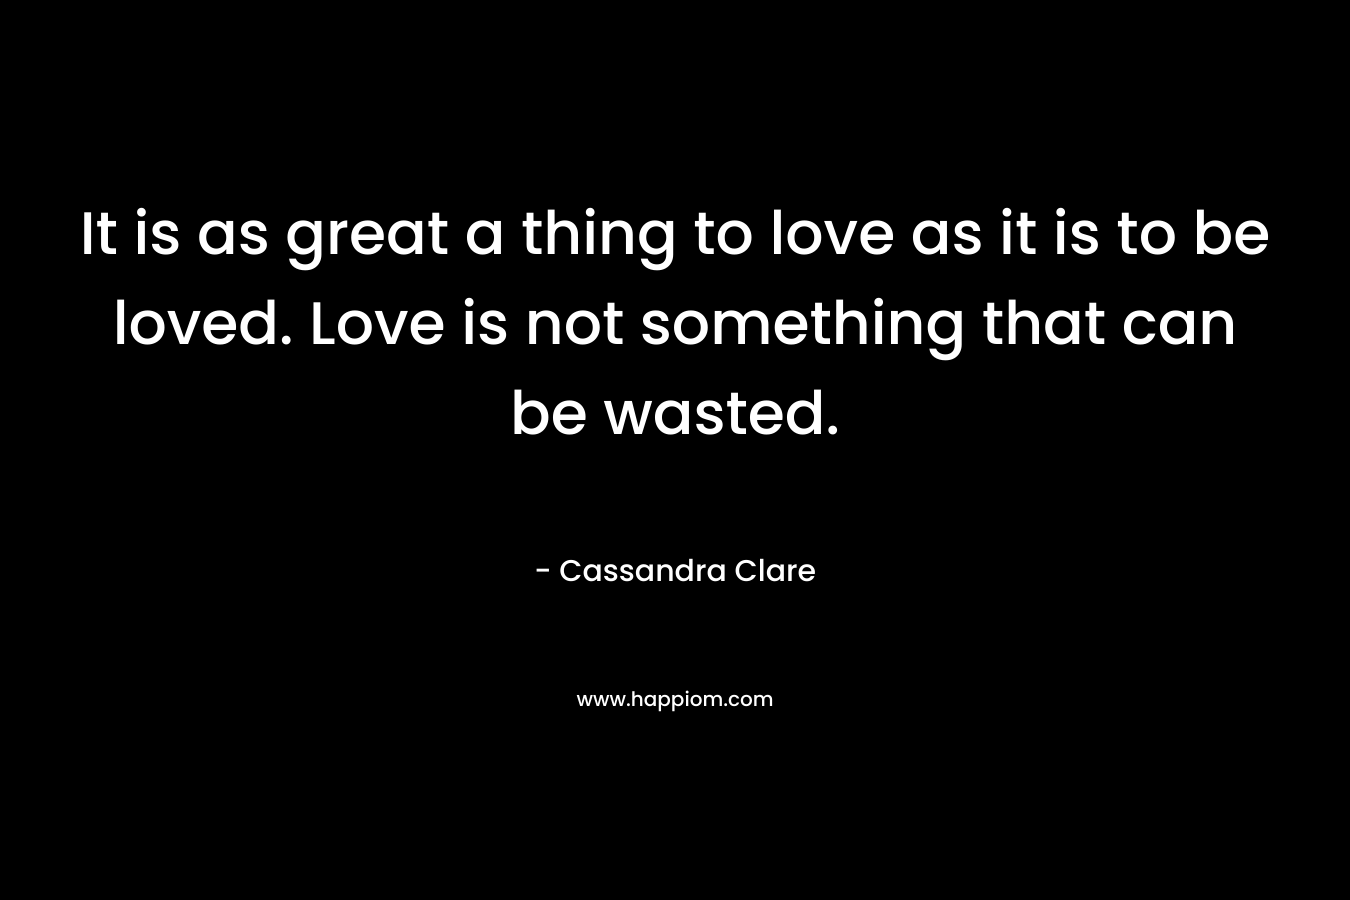 It is as great a thing to love as it is to be loved. Love is not something that can be wasted.